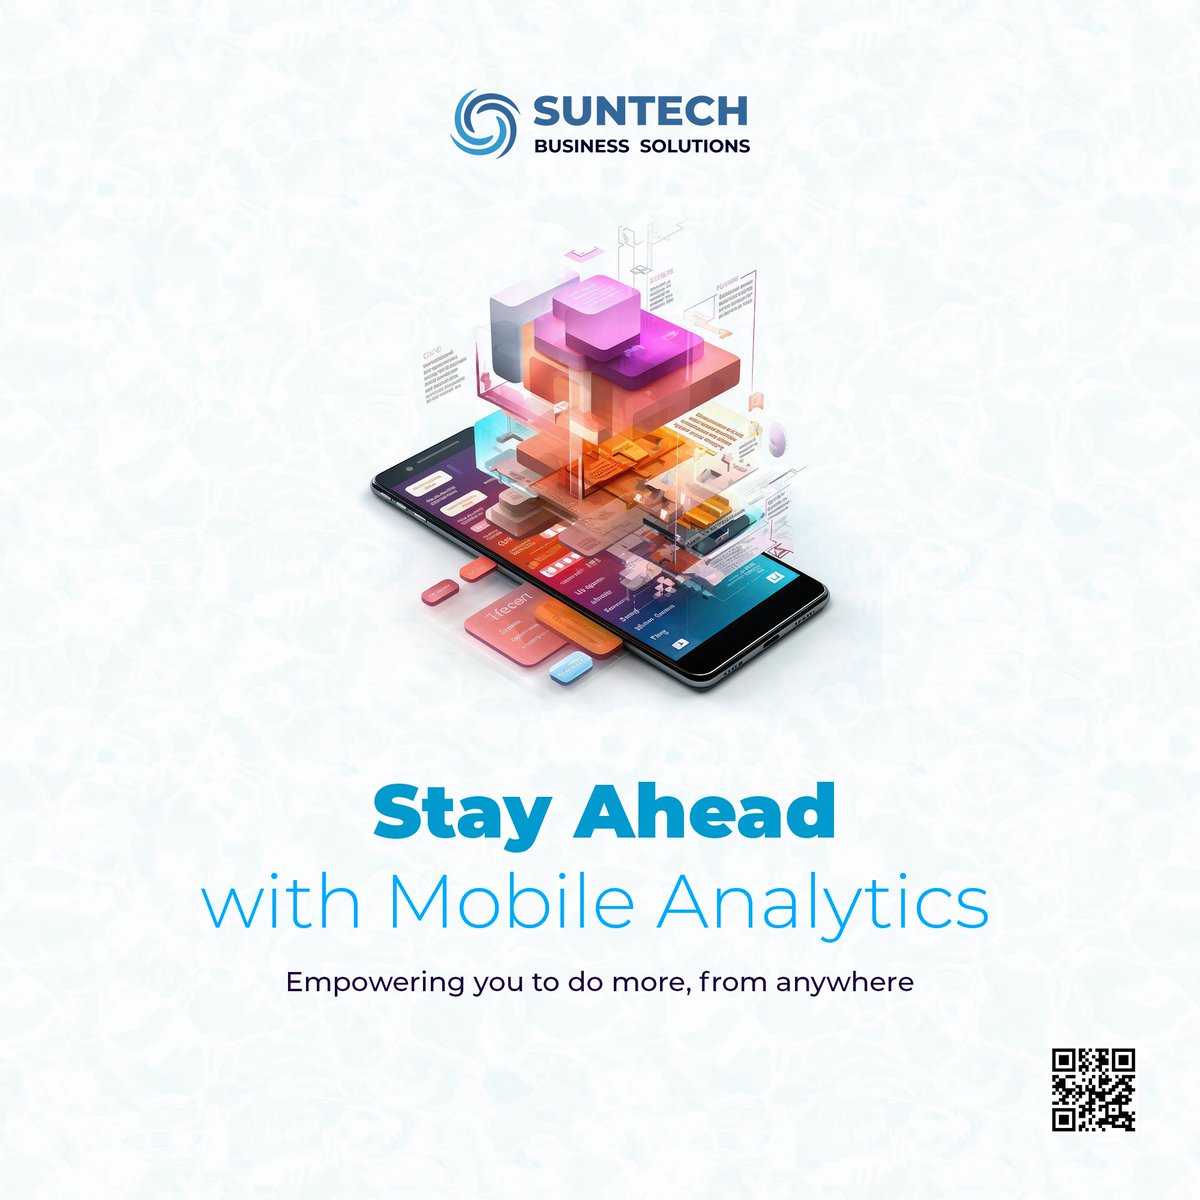 Transforming Insights into Action with Mobile Analytics. 📊📲 #DataDrivenDecisions #MobileEmpowerment #mobileanalytics #erp #erpsoftware #erpsolutions #technology #dubaibusiness #suntechbusinesssolutions